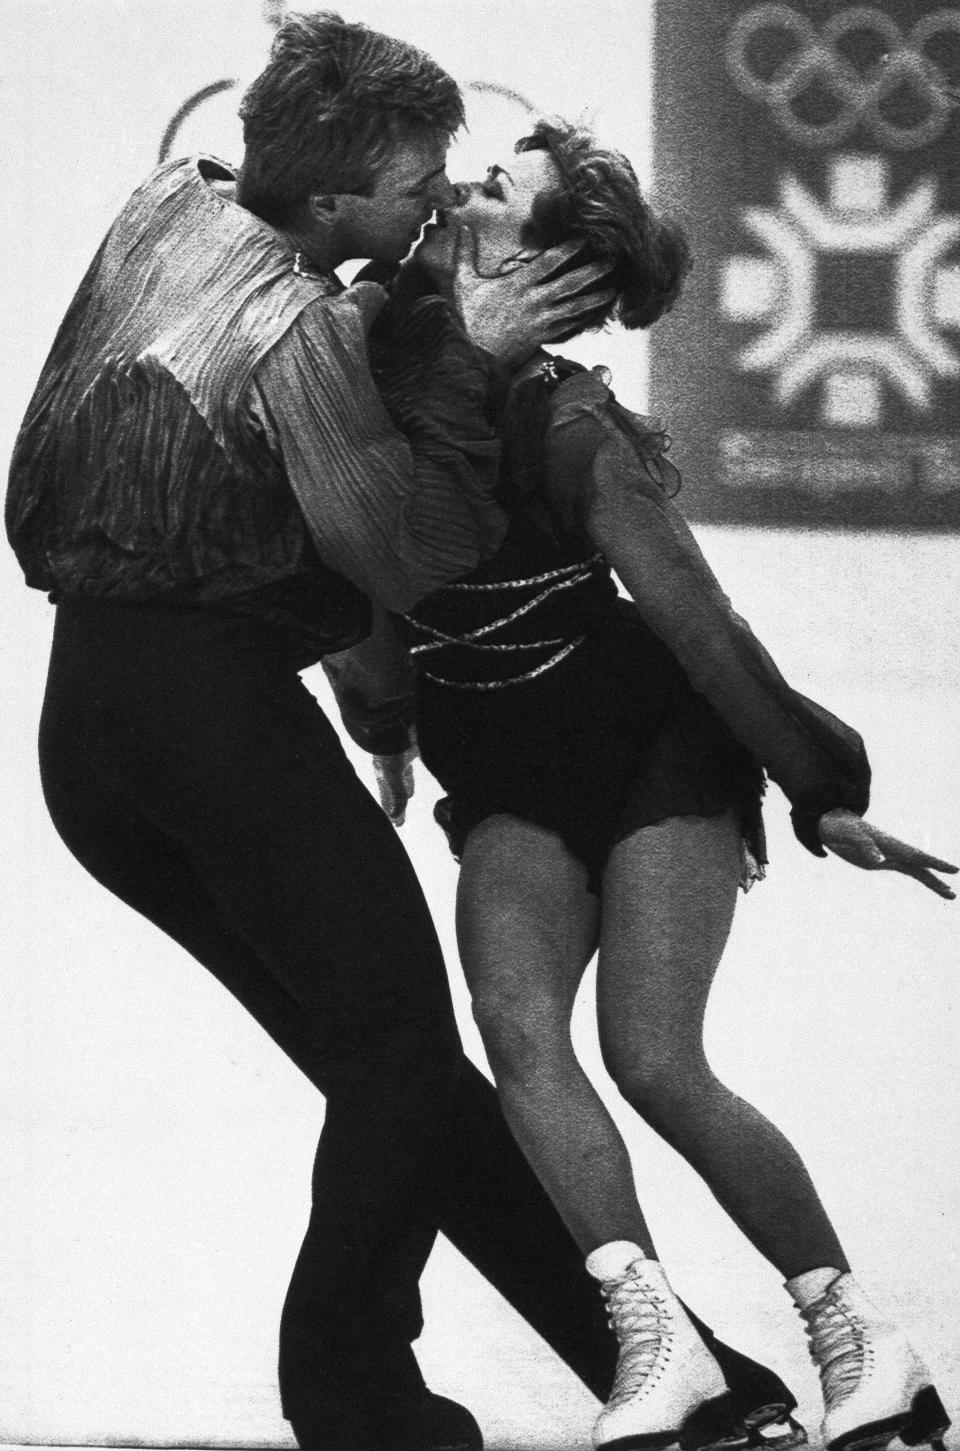 FILE - Britain's Jayne Torvill and Christopher Dean kiss during their performance in Olympic ice dancing at the Winter Olympics in Sarajevo, Bosnia, Feb. 14, 1984. (AP Photo/File)